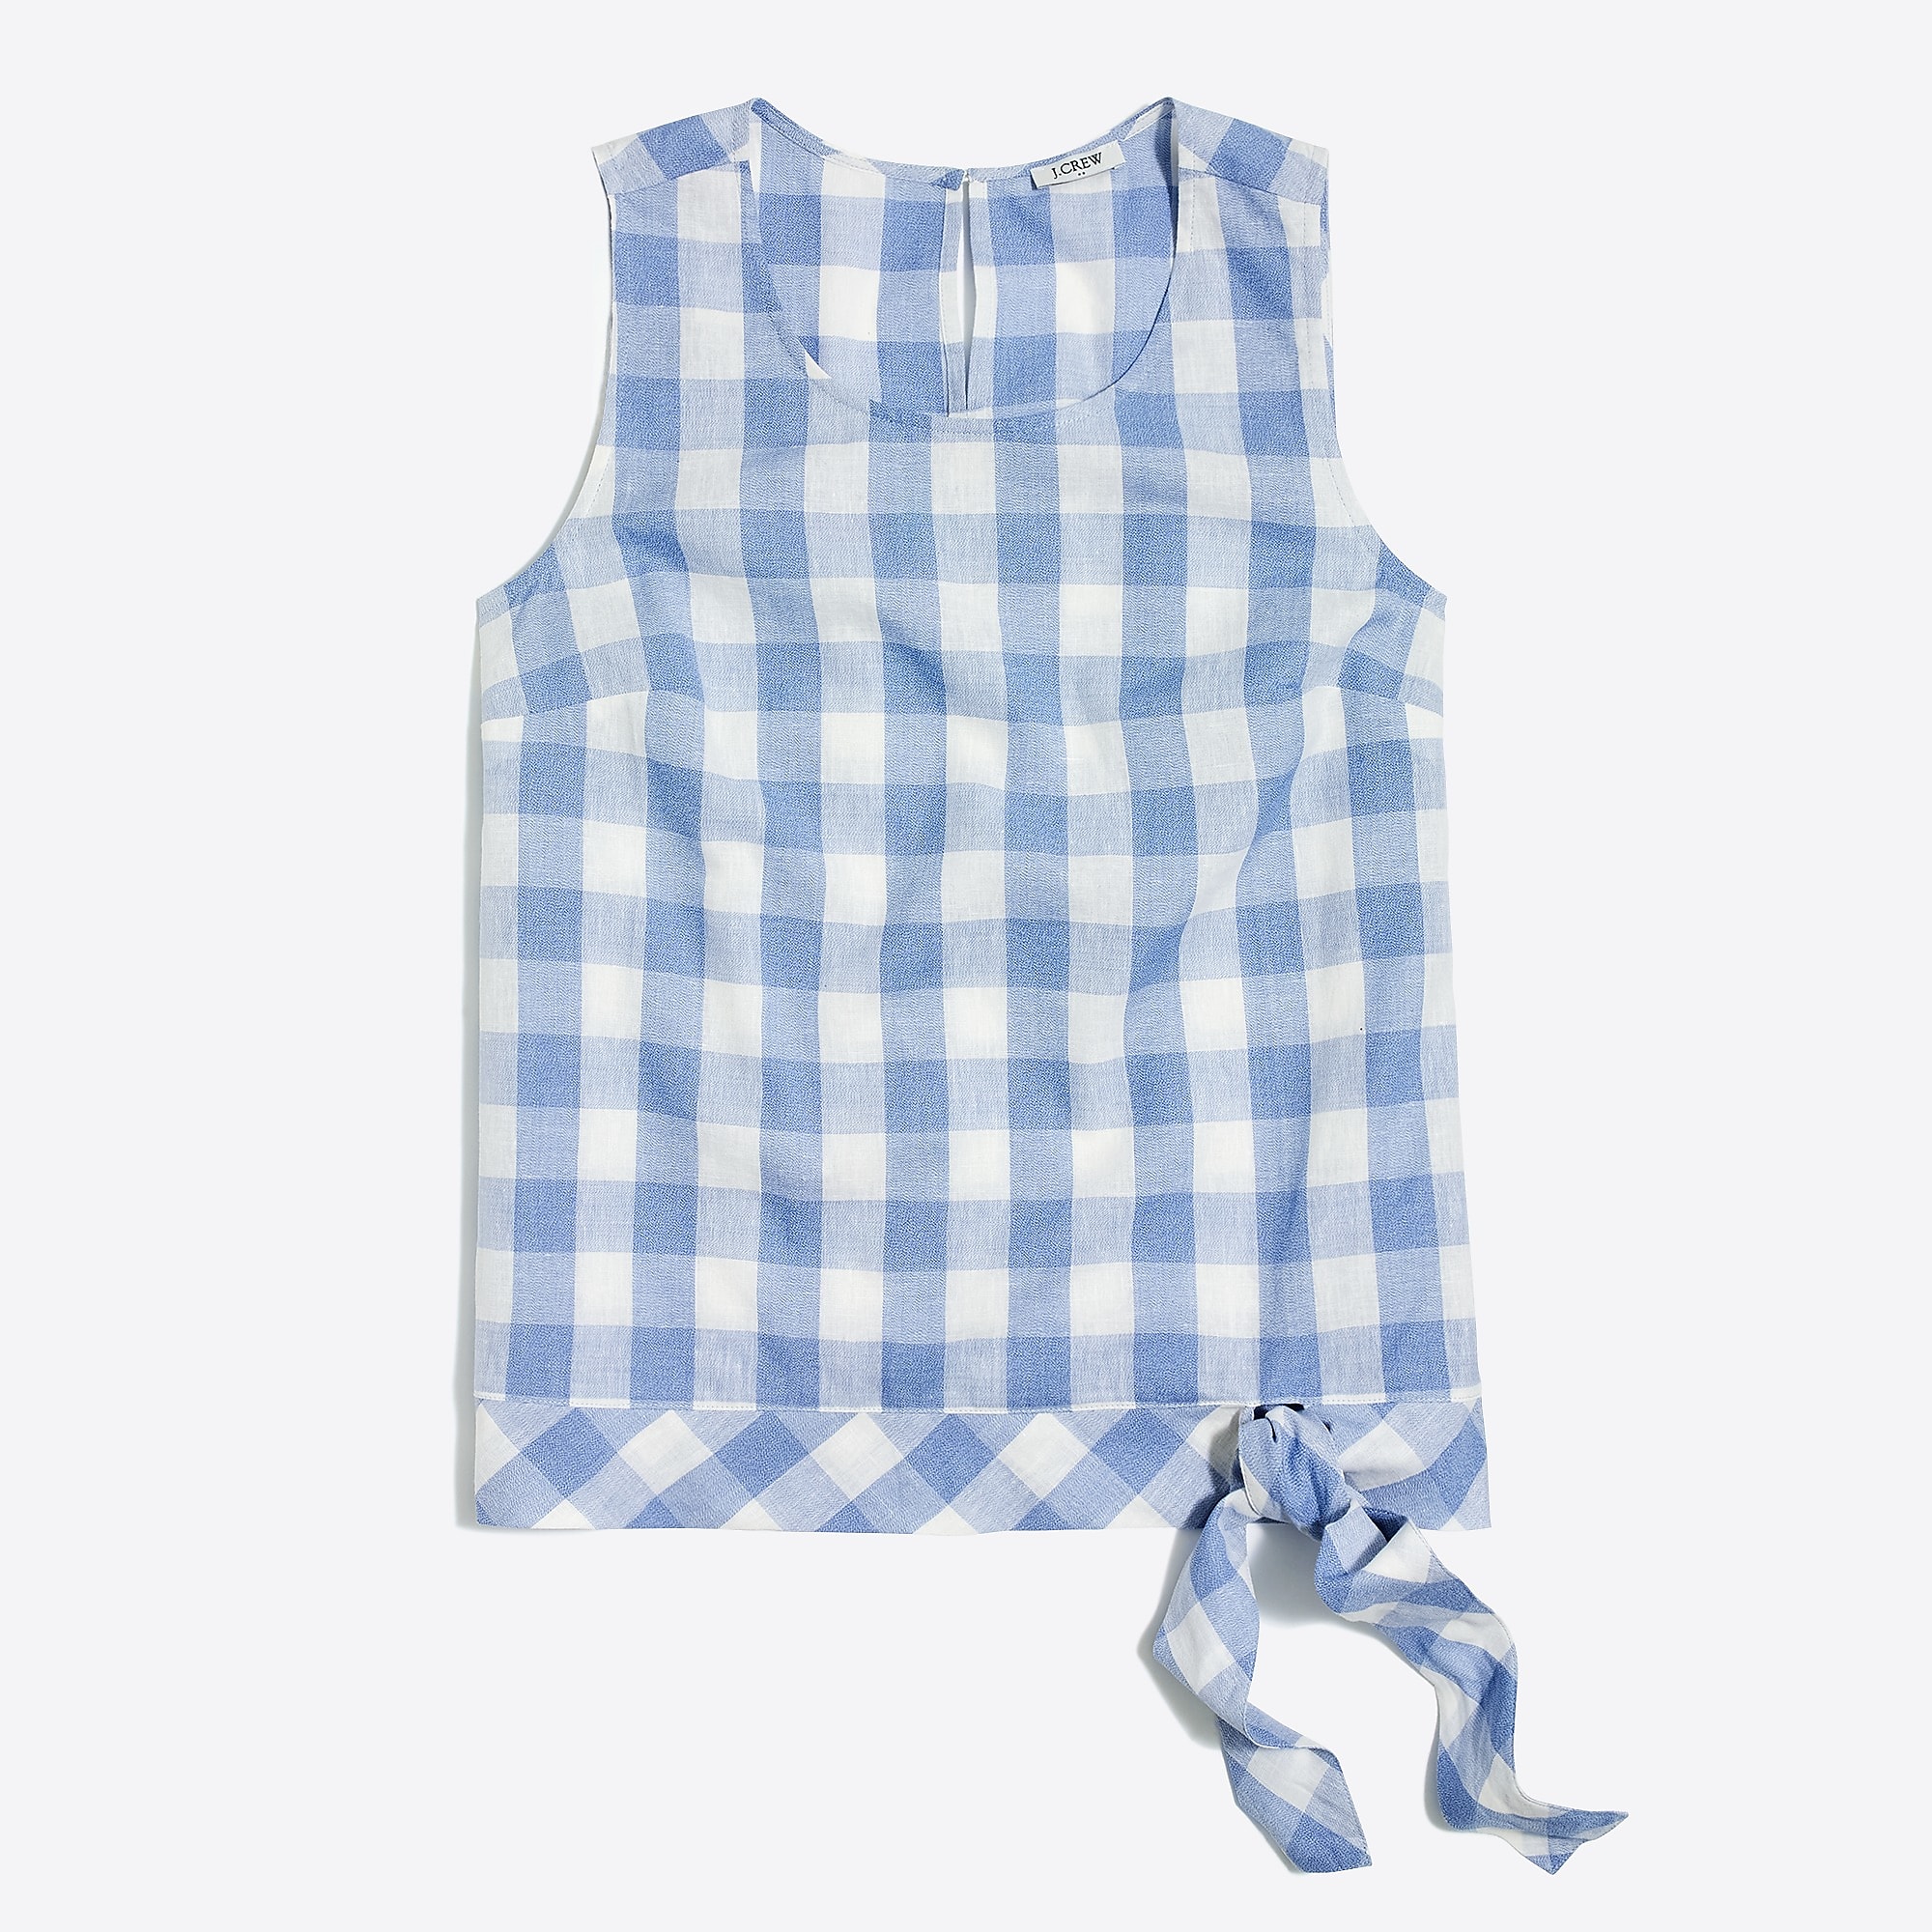 Blue Gingham Tank Top with Bow Tie